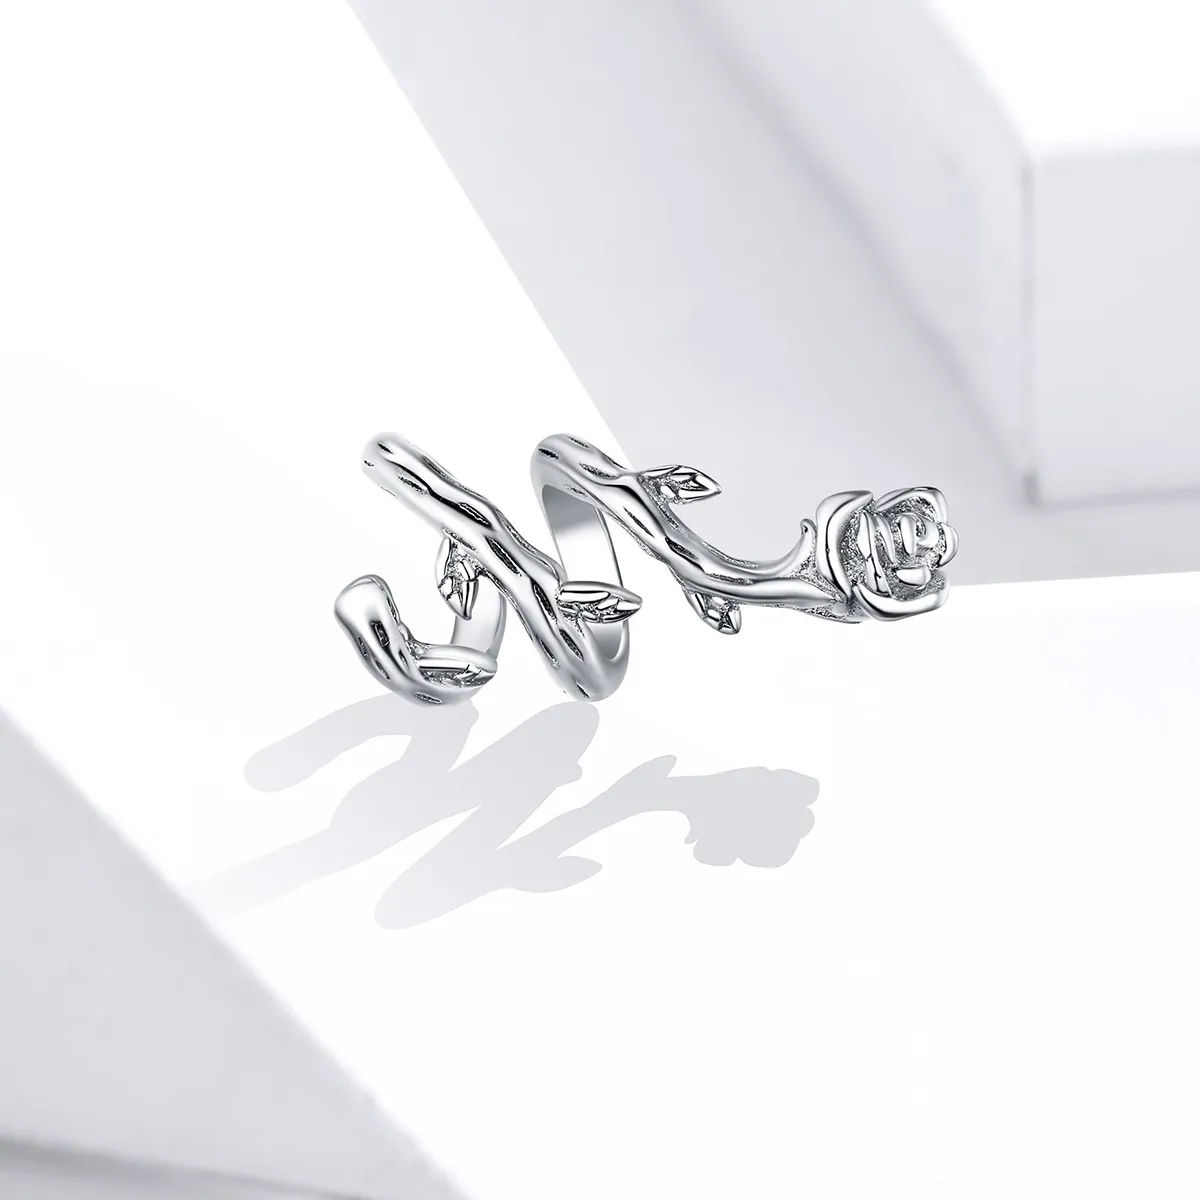 Pandora Style Silver Rose Vines Charm - BSC310